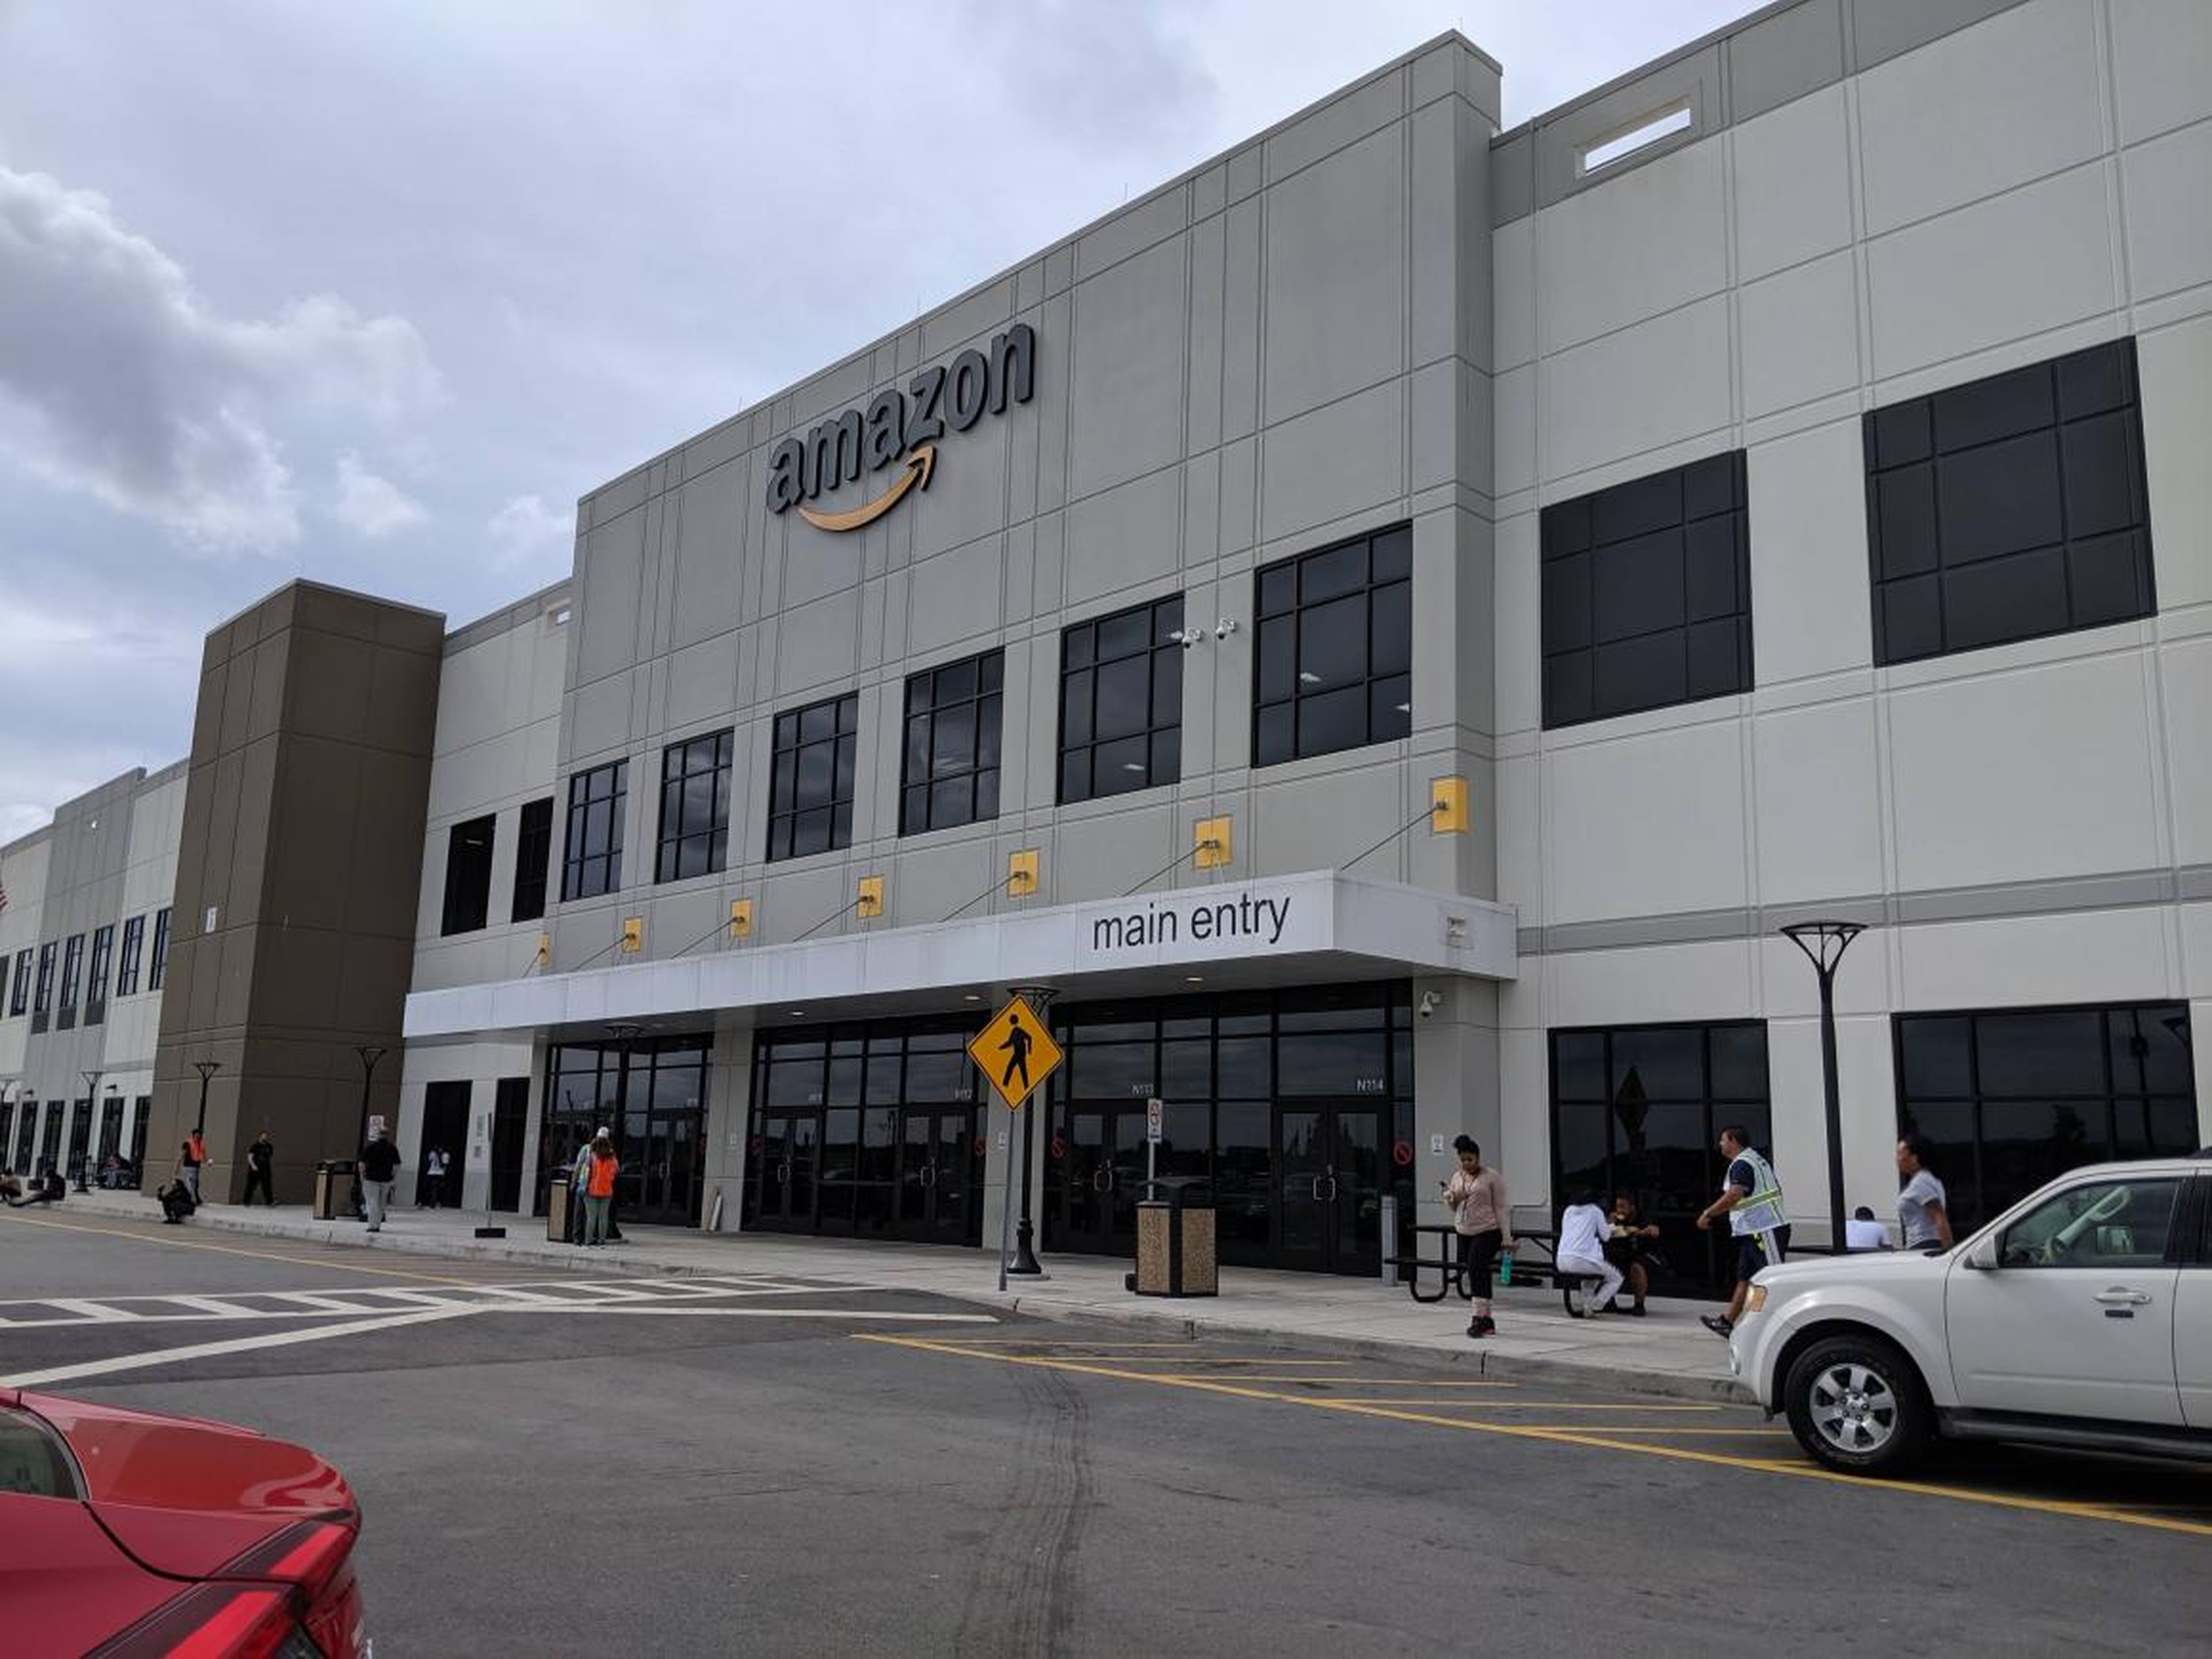 I headed inside for the tour, which was arranged by Amazon's public-relations department.